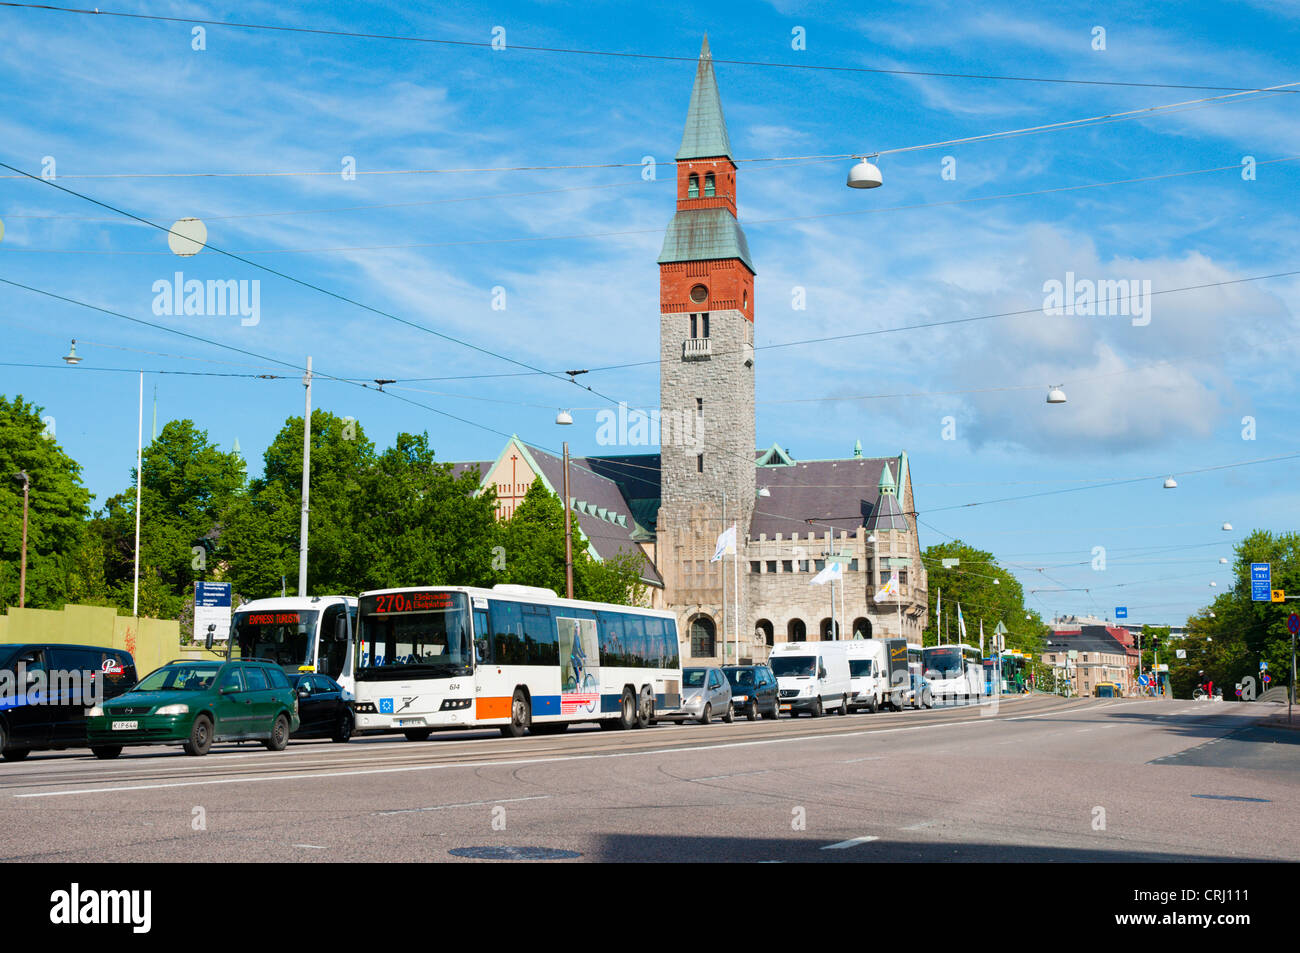 Traffic on Mannerheimintie street in front of Kansallismuseo the National Museum building central Helsinki Finland Europe Stock Photo